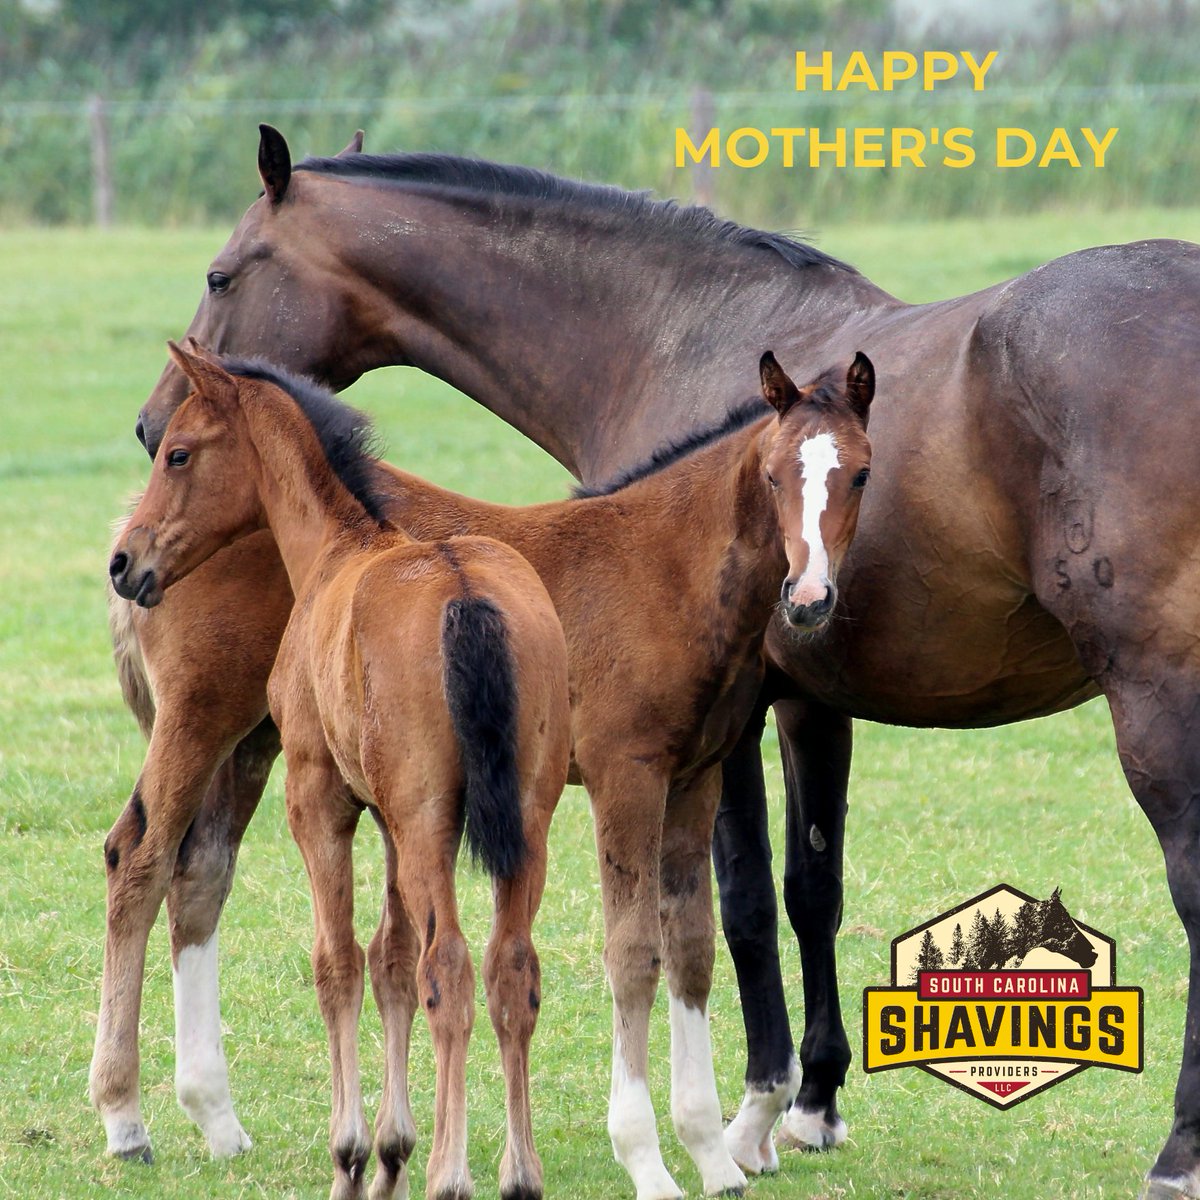 Enjoy your day and weekend. Happy Mother's Day! 

#southcarolinashavings #aikensc #welovehorses #equinebedding #shavings #fines #flakes #blended